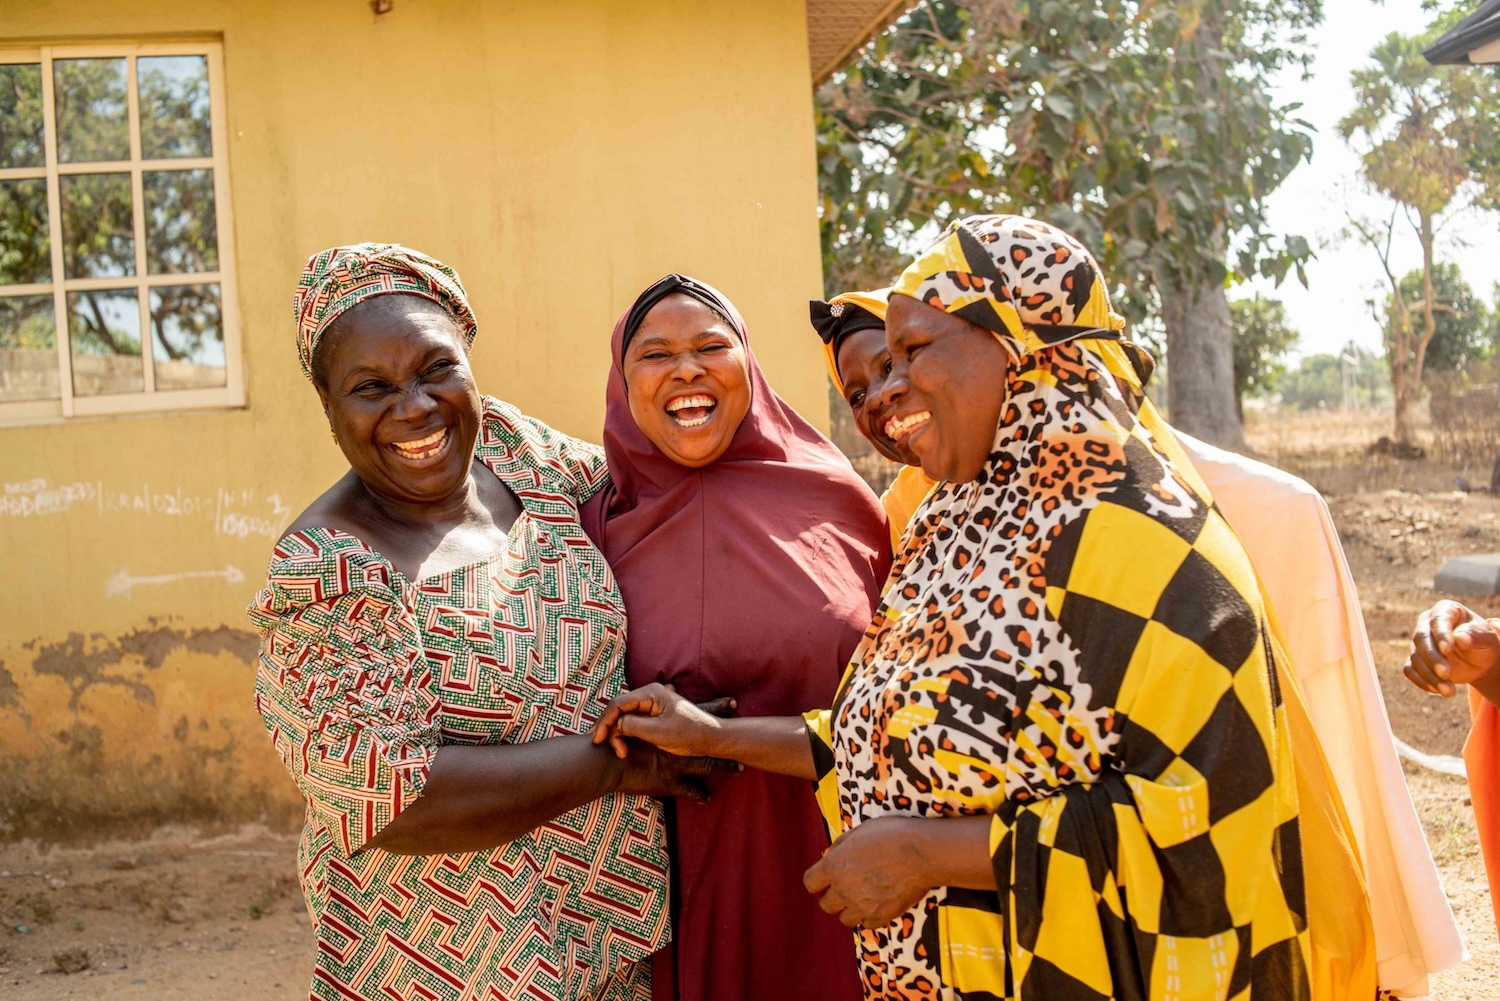 Four women, wearing colorful traditional attire, stand outside a building in Kagoro Chiefdom and laugh together while holding hands. Trees and a window are visible in the background, symbolizing the community resilience fostered through their interfaith dialogue.